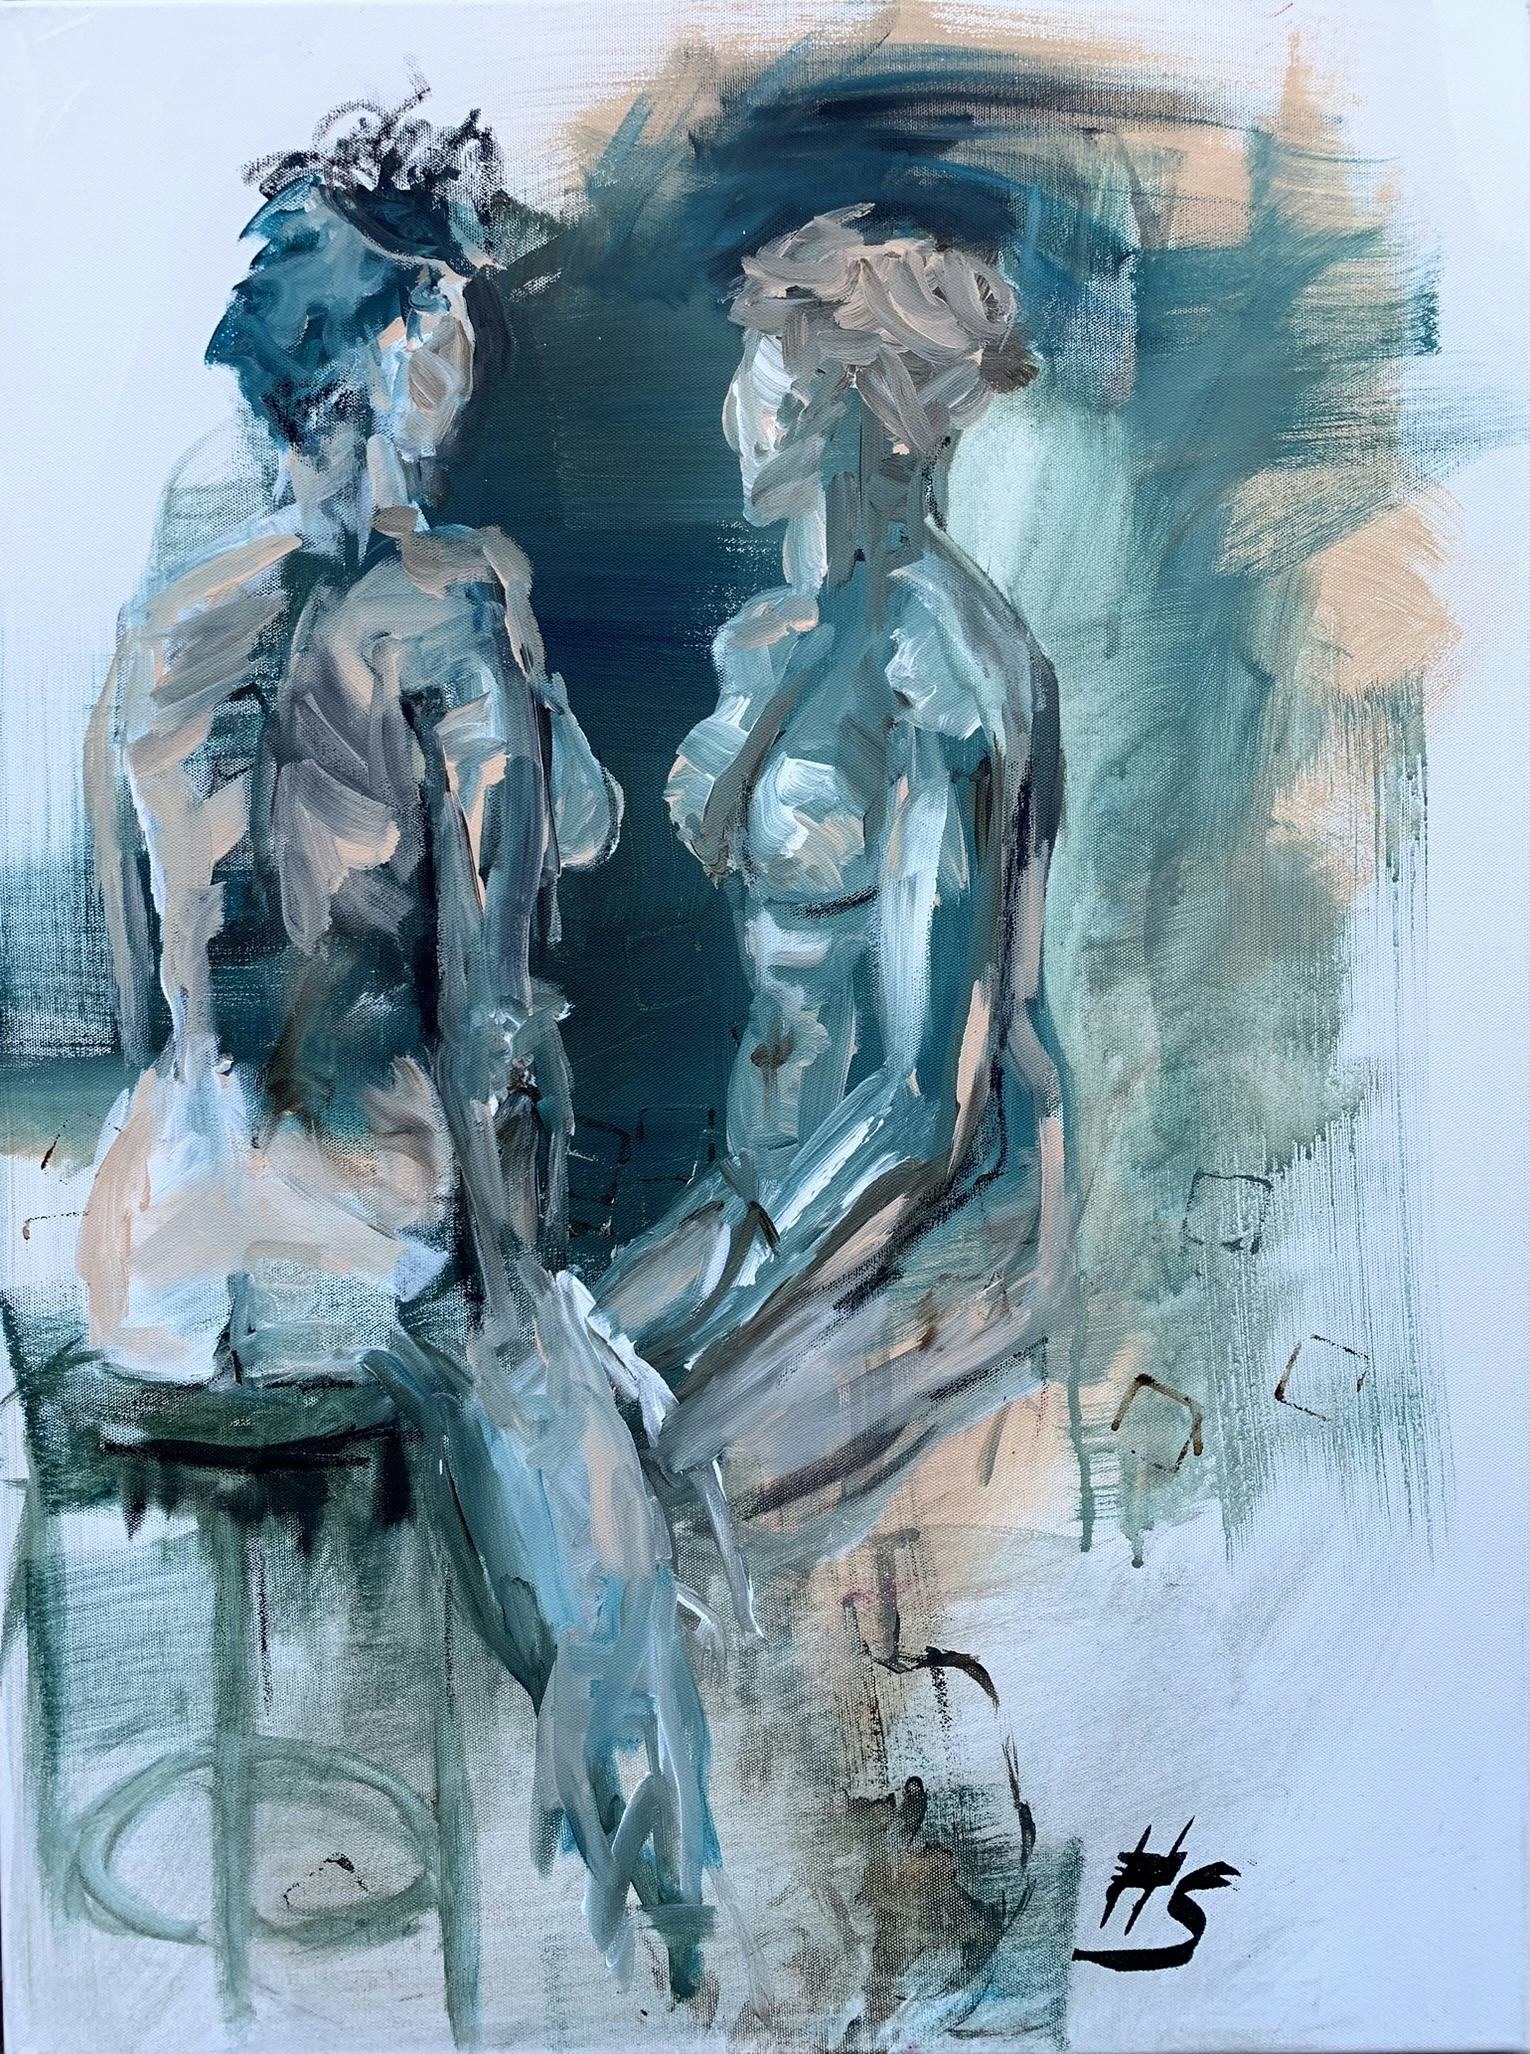 Artwork by Heike Schümann depicts two seated women facing each other